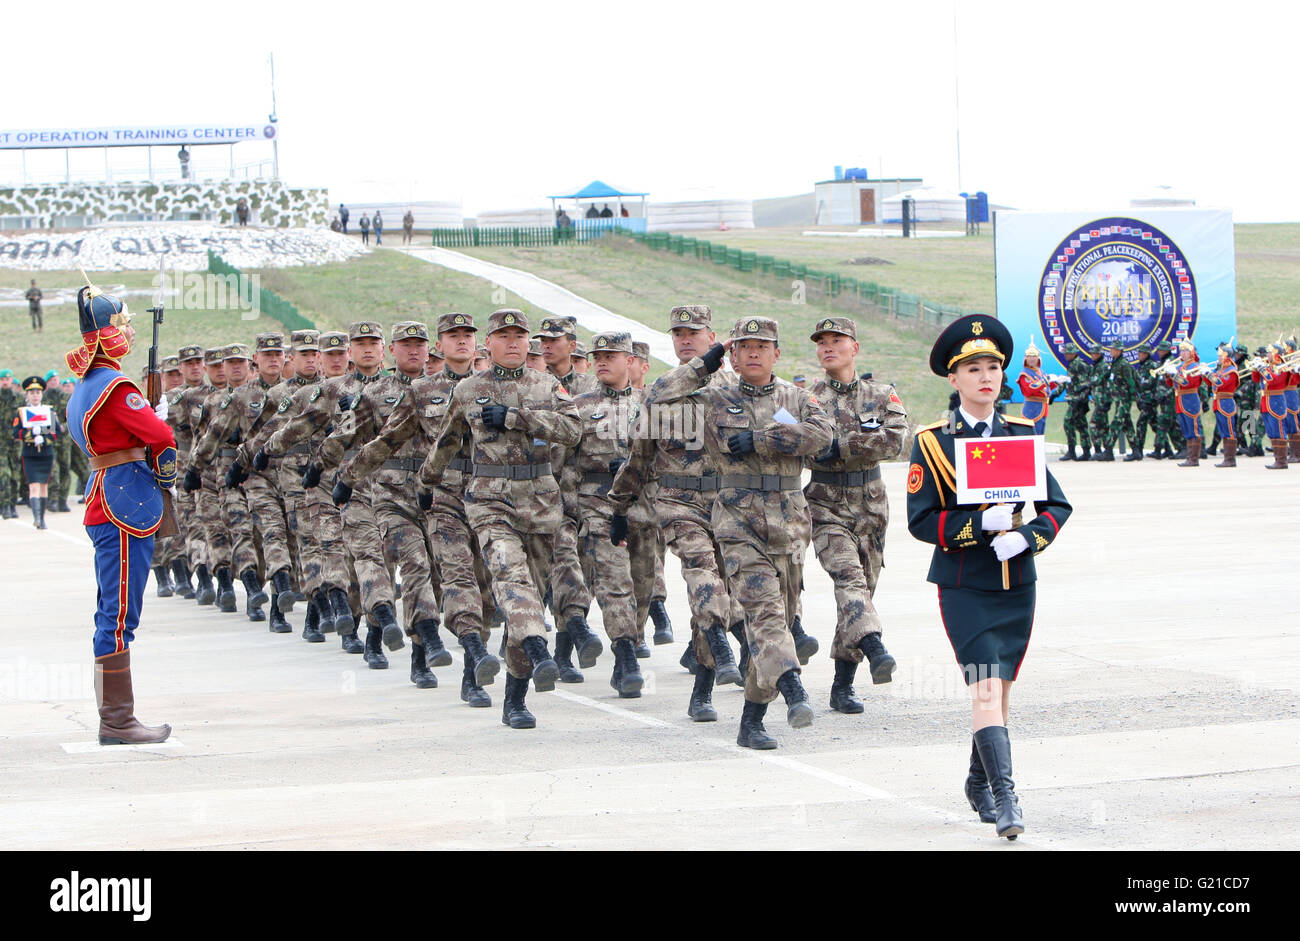 (160522) -- ULAN BATOR, May 22, 2016 (Xinhua) -- Chinese soldiers are on a parade at the opening ceremony of the Khan Quest 2016 peacekeeping military drill in Tavan Tolgoi, Mongolia, May 22, 2016. Mongolia. Mongolia kicked off its annual multinational peacekeeping drill on Sunday, with an eye to boosting military-to-military interoperability on peacekeeping missions. Military personnel from 47 countries in five continents have arrived in Tavan Tolgoi, a Mongolian military training ground about 65 kilometers away from Ulan Bator, capital of Mongolia, for the military exercise code-named 'Khan Stock Photo